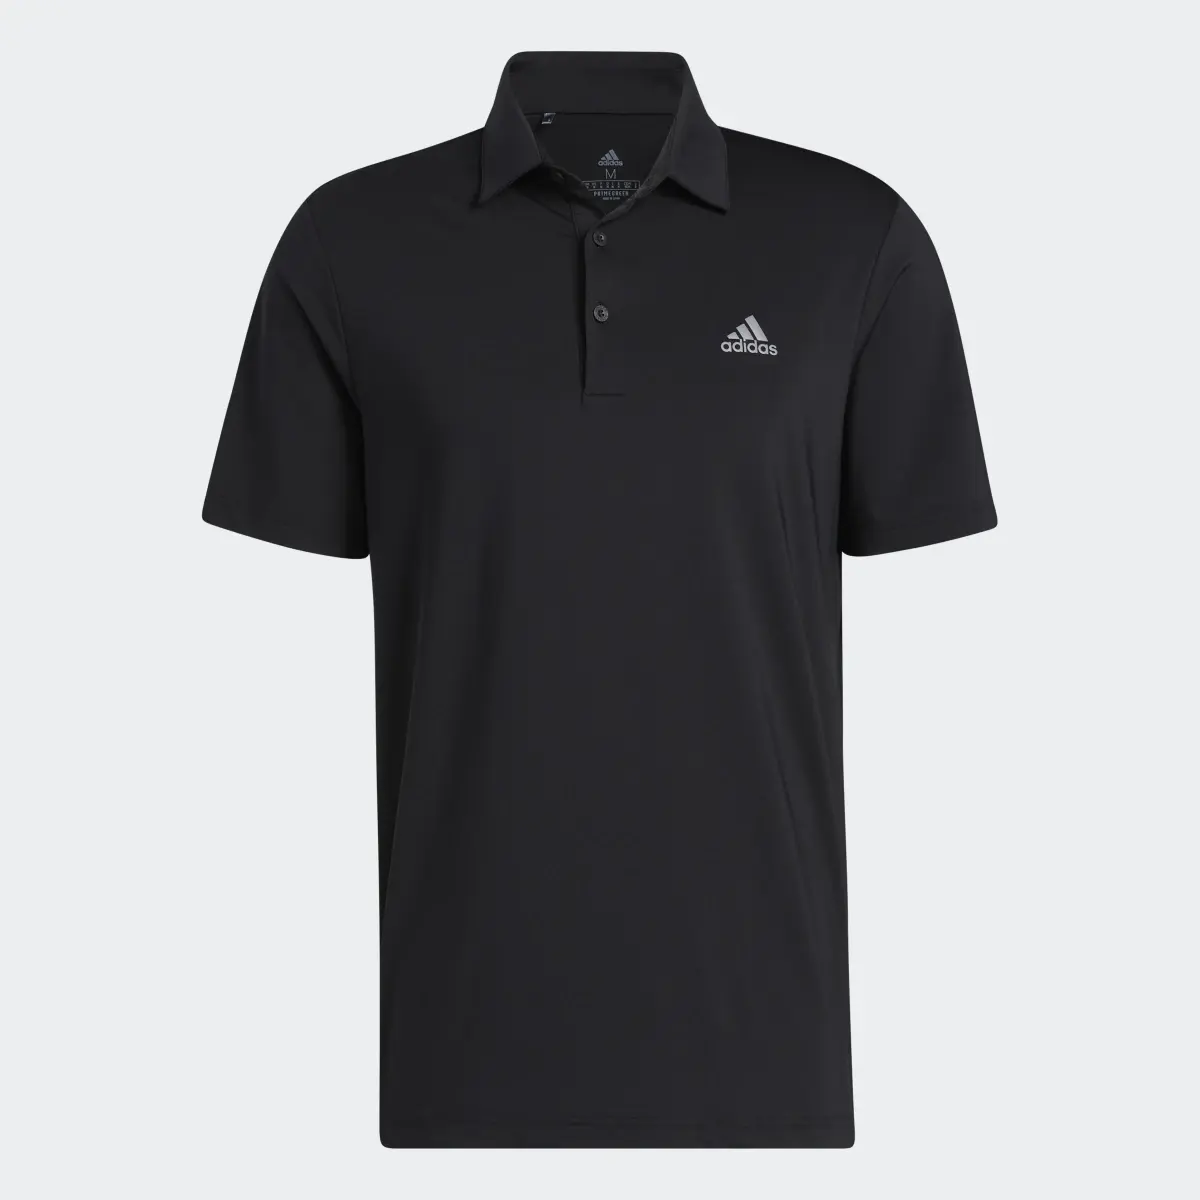 Adidas Ultimate365 Solid Left Chest Golf Polo Shirt. 1